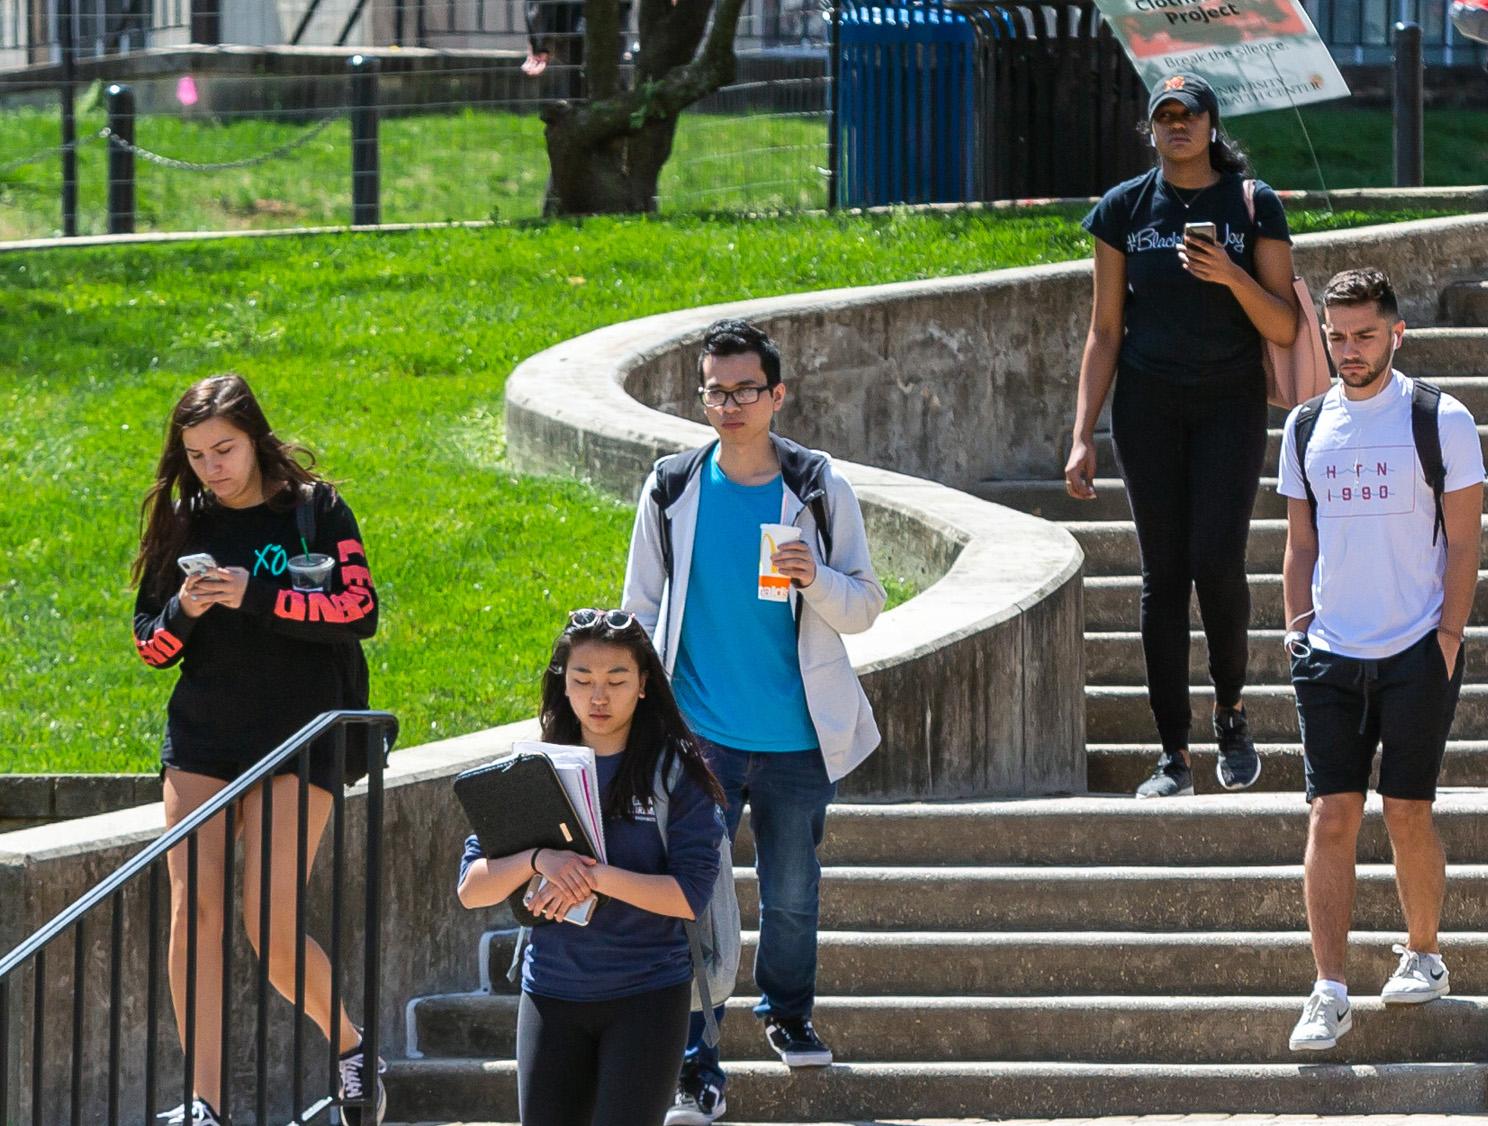 Students walking on steps outdoors